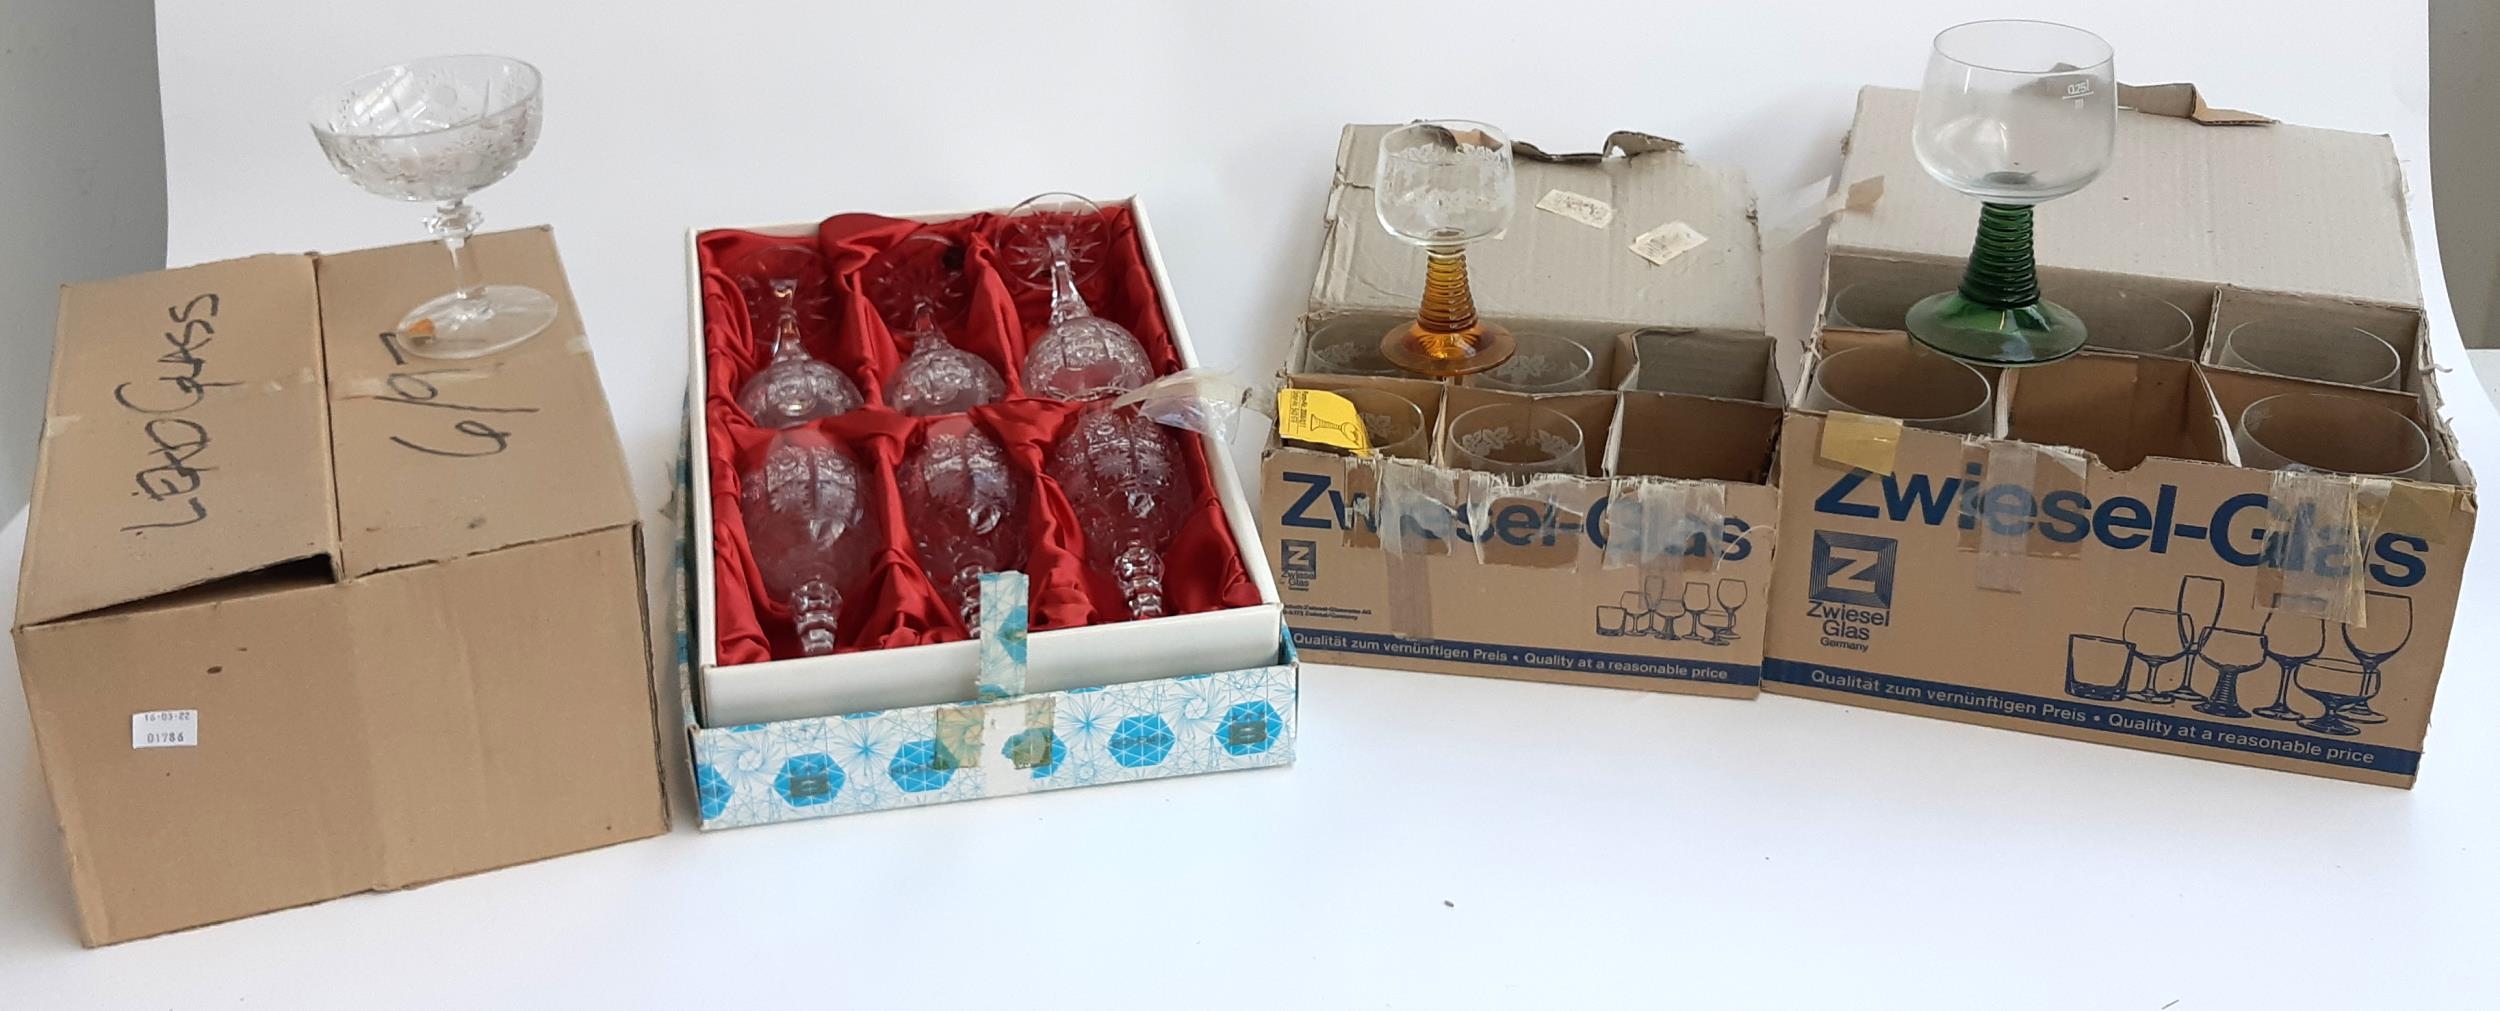 A boxed set of 6 Bohemia hand cut lead crystal wine glasses, together with a quantity of Zweisel-